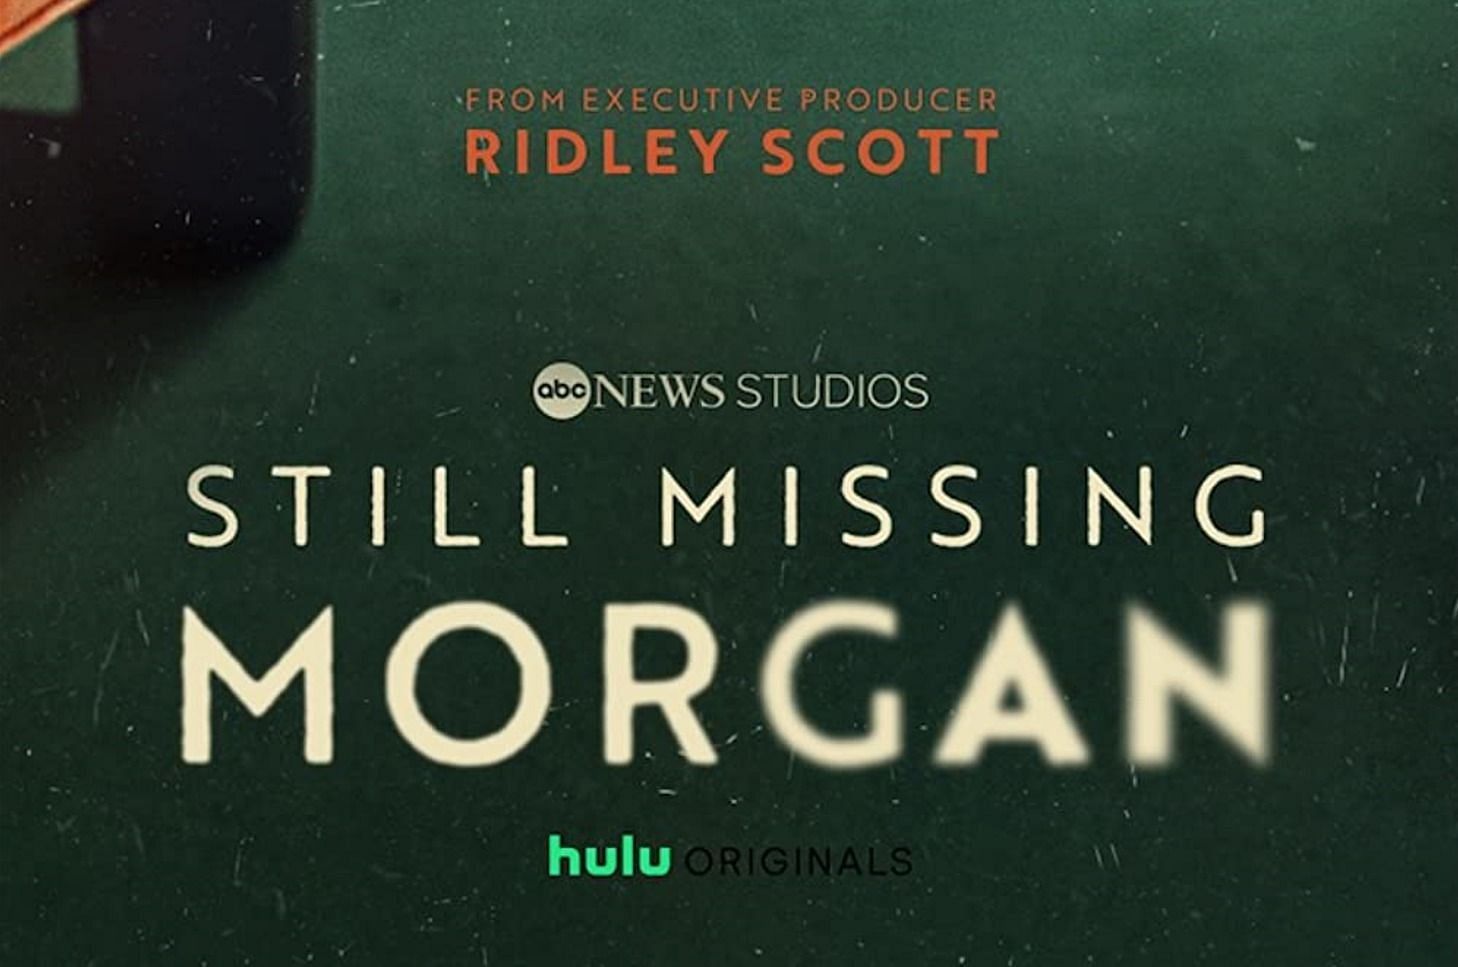 Even after 25 years the investigation of Morgan Nick